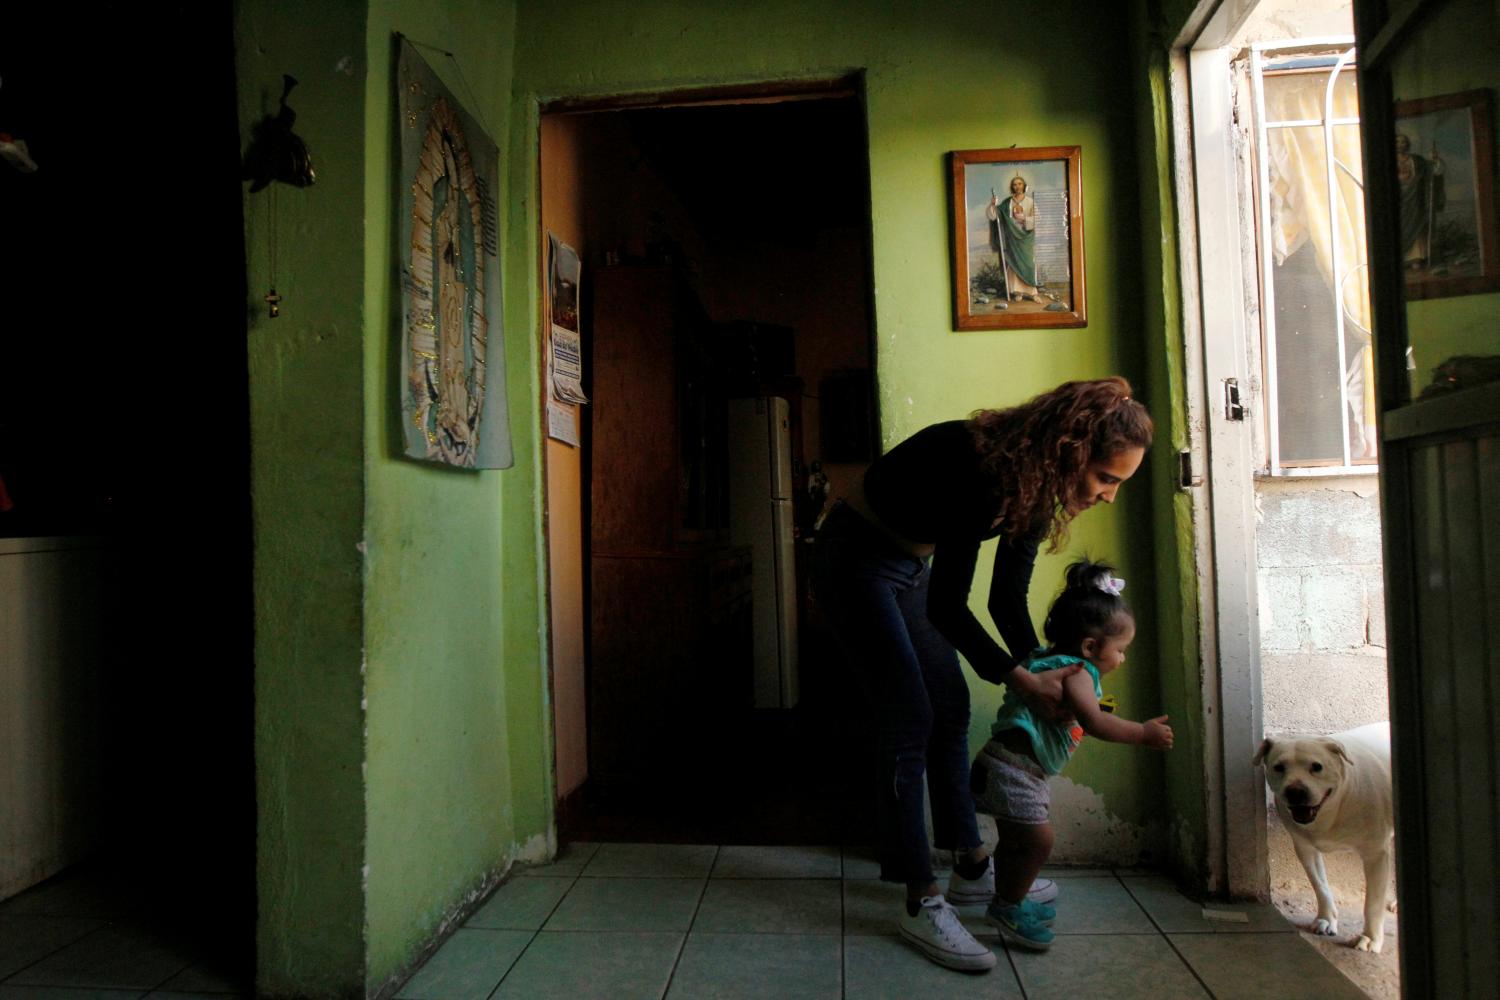 Fatima Paola Pizarro (L), holds her daughter Aitana Pizarro at her grandparent's home in Ciudad Juarez, Mexico May 8, 2018. Fatima is the daughter of Marcelino Pizarro who lives in El Paso, U.S. REUTERS/Jose Luis Gonzalez   SEARCH "MARCELINO PIZARRO" FOR THIS STORY. SEARCH "WIDER IMAGE" FOR ALL STORIES. - RC1EC57A0B00